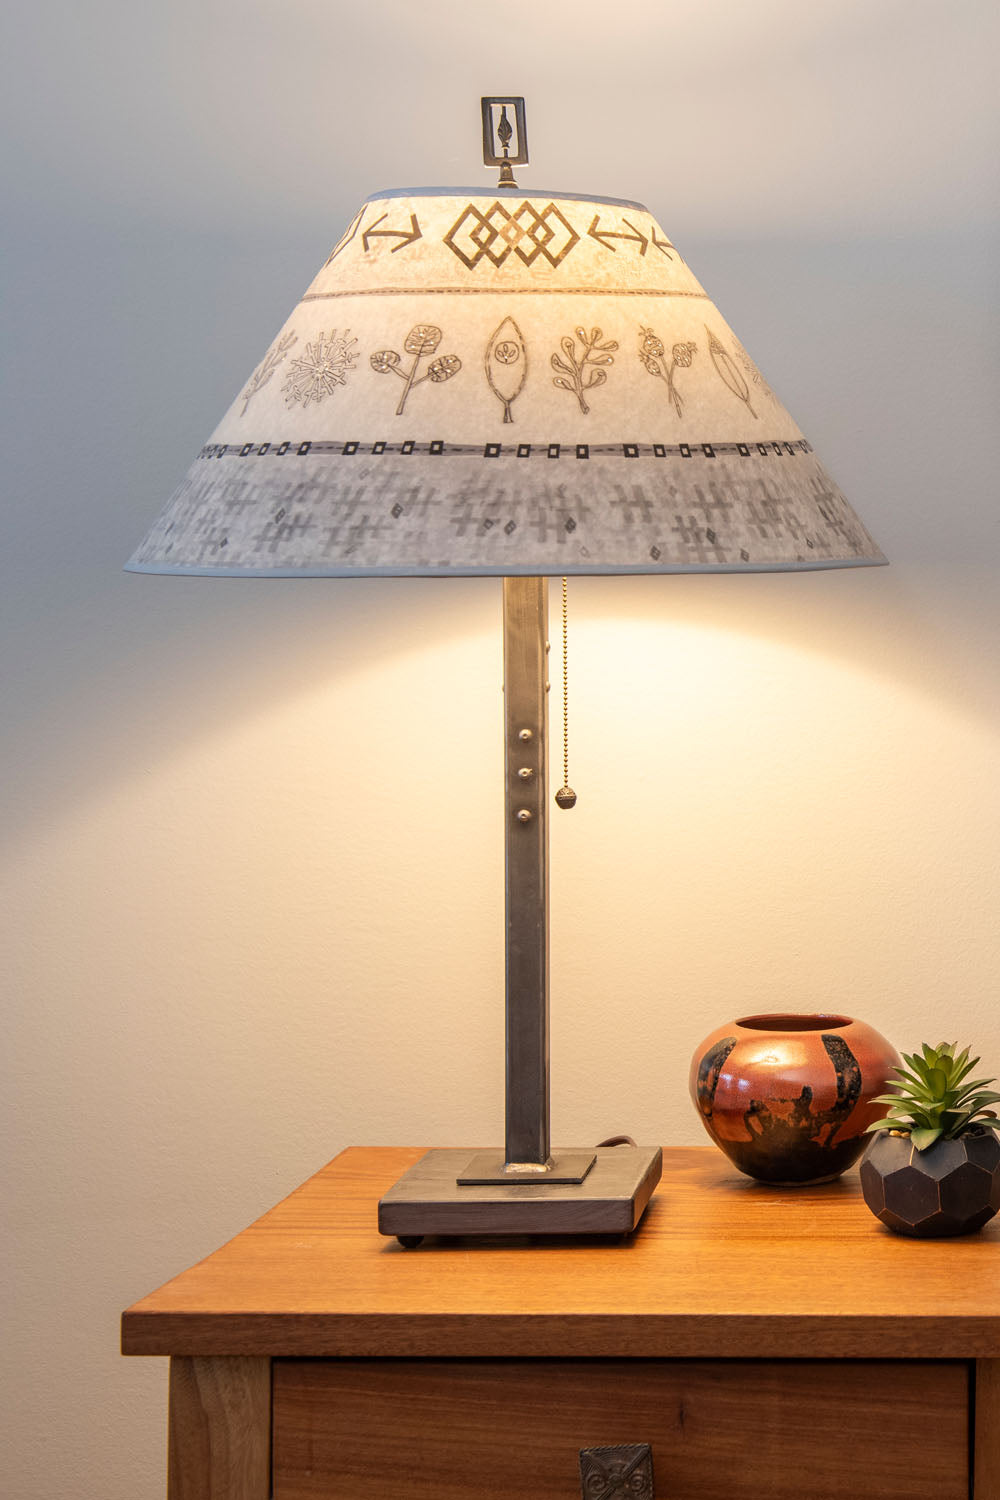 Janna Ugone & Co Table Lamp Steel Table Lamp with Large Conical Shade in Woven & Sprig in Mist